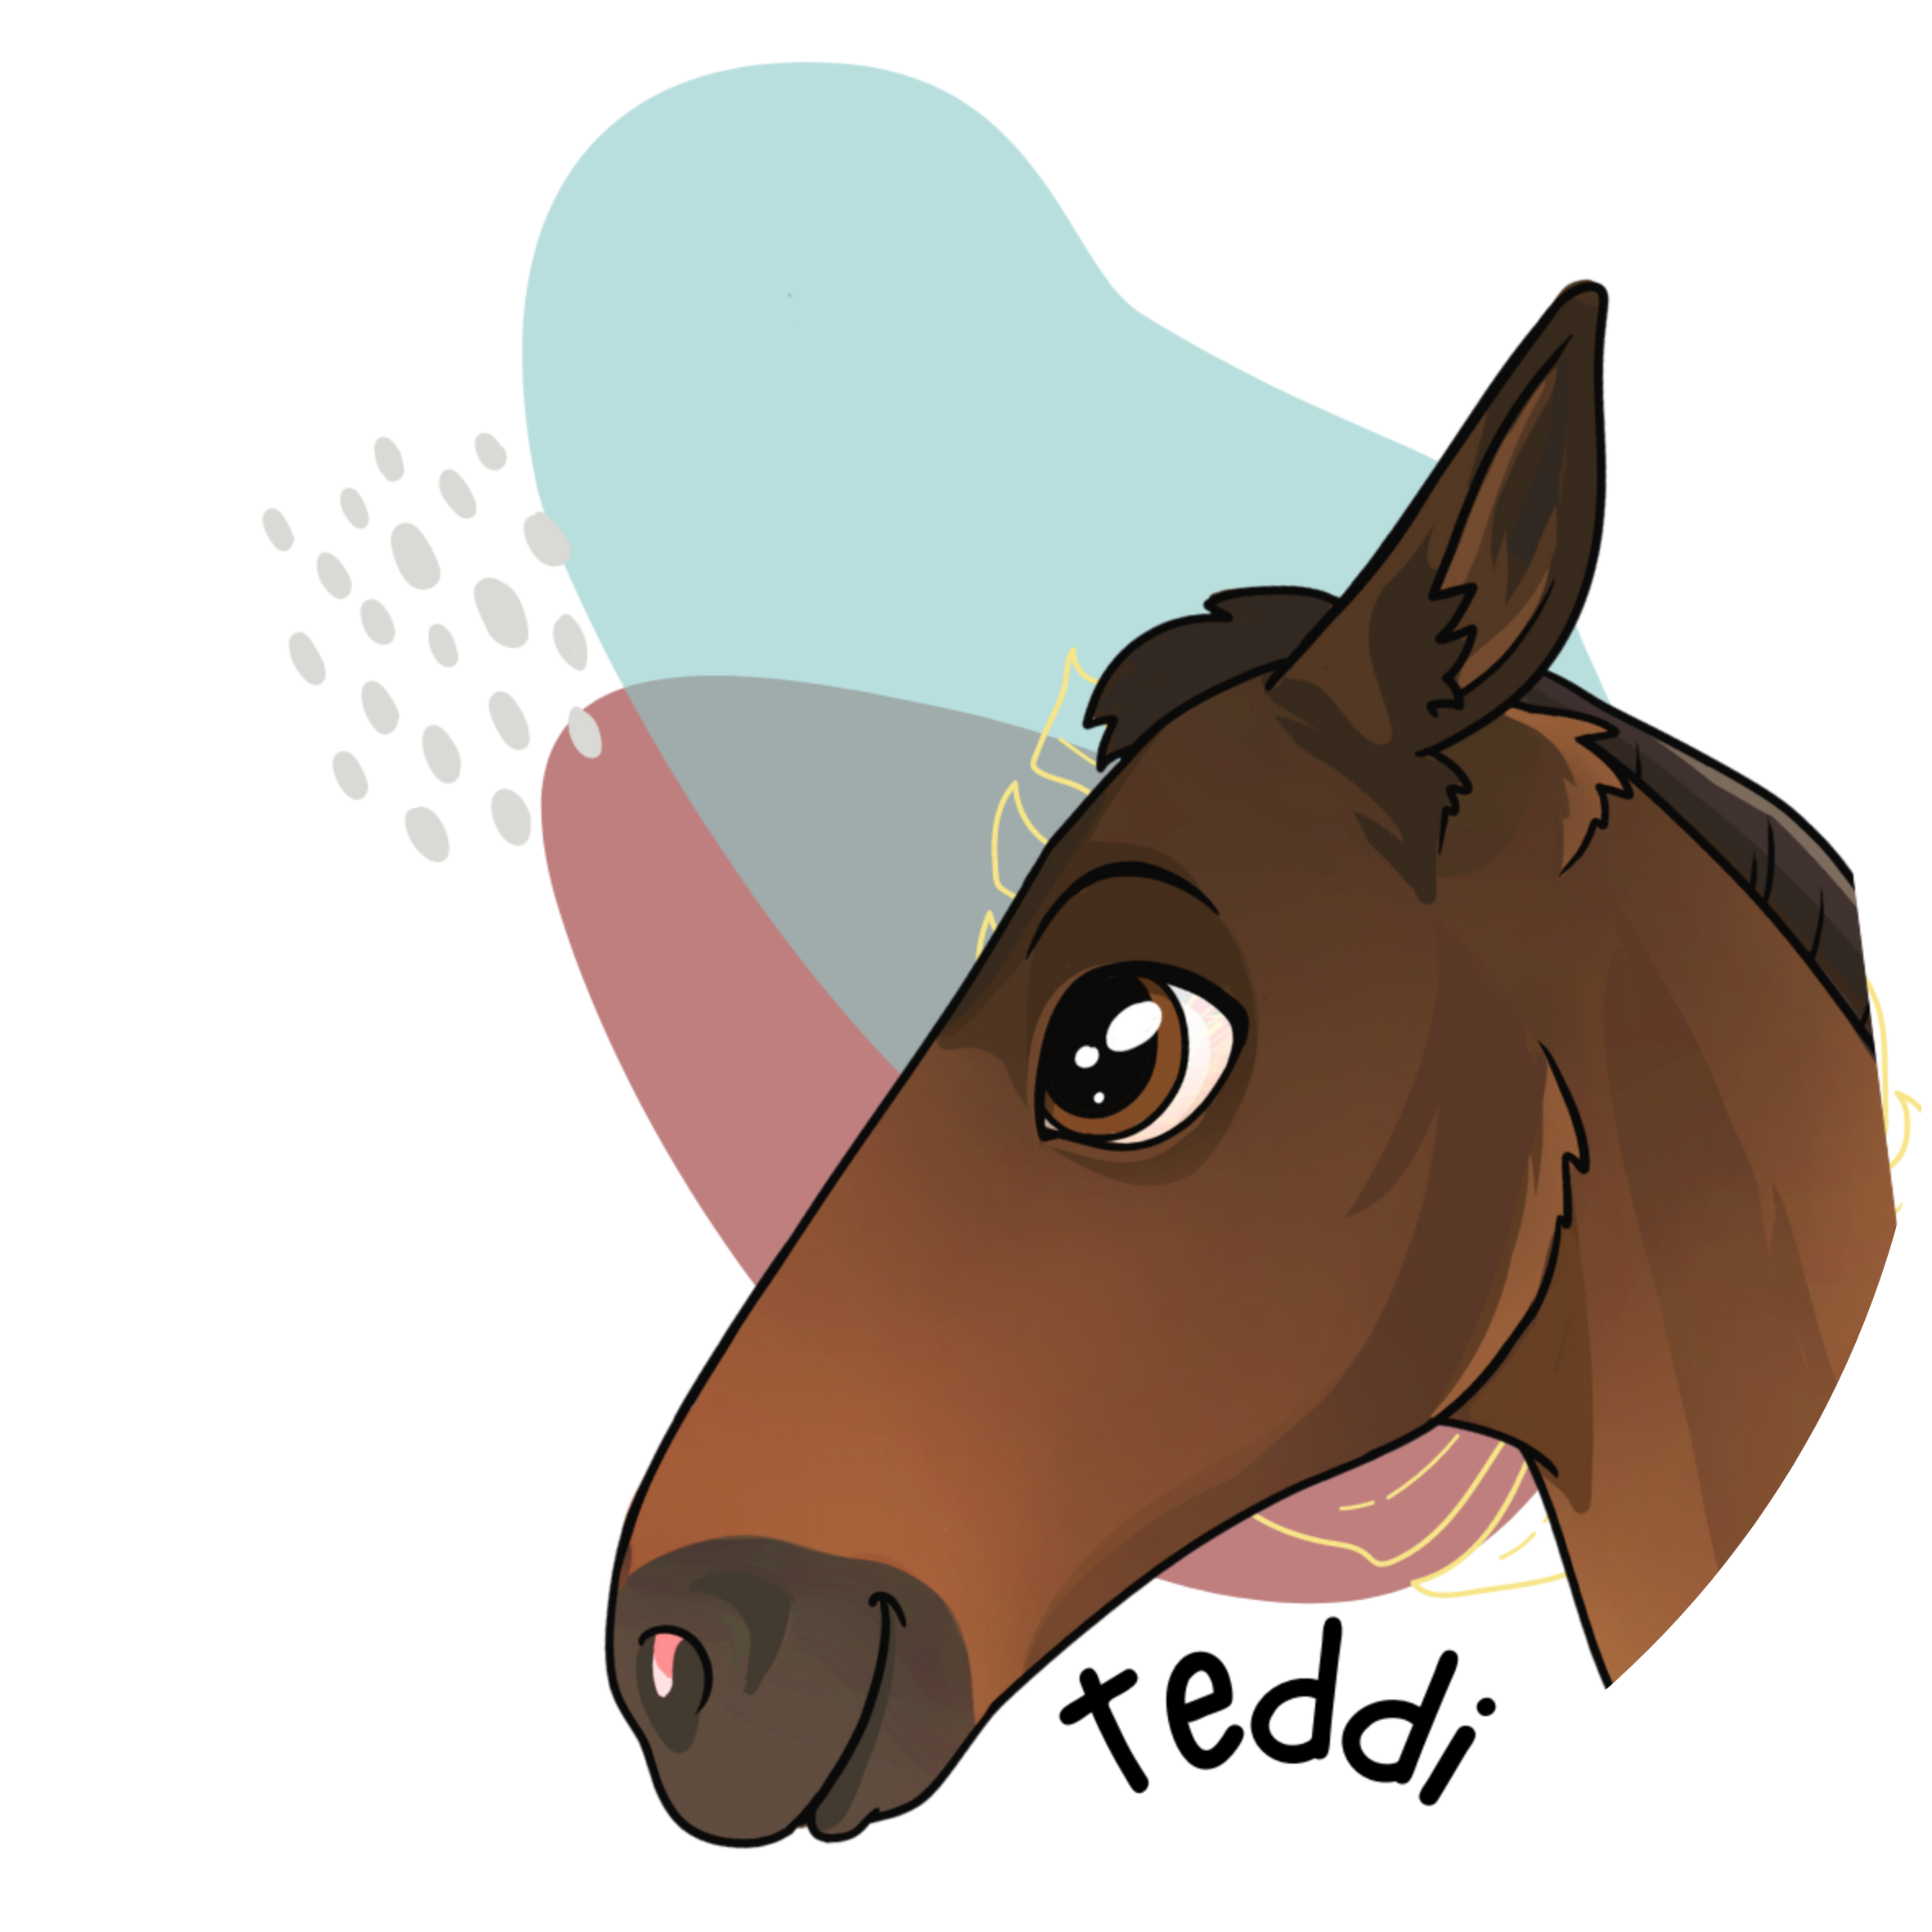 Teddi - Horse sticker .png large.png